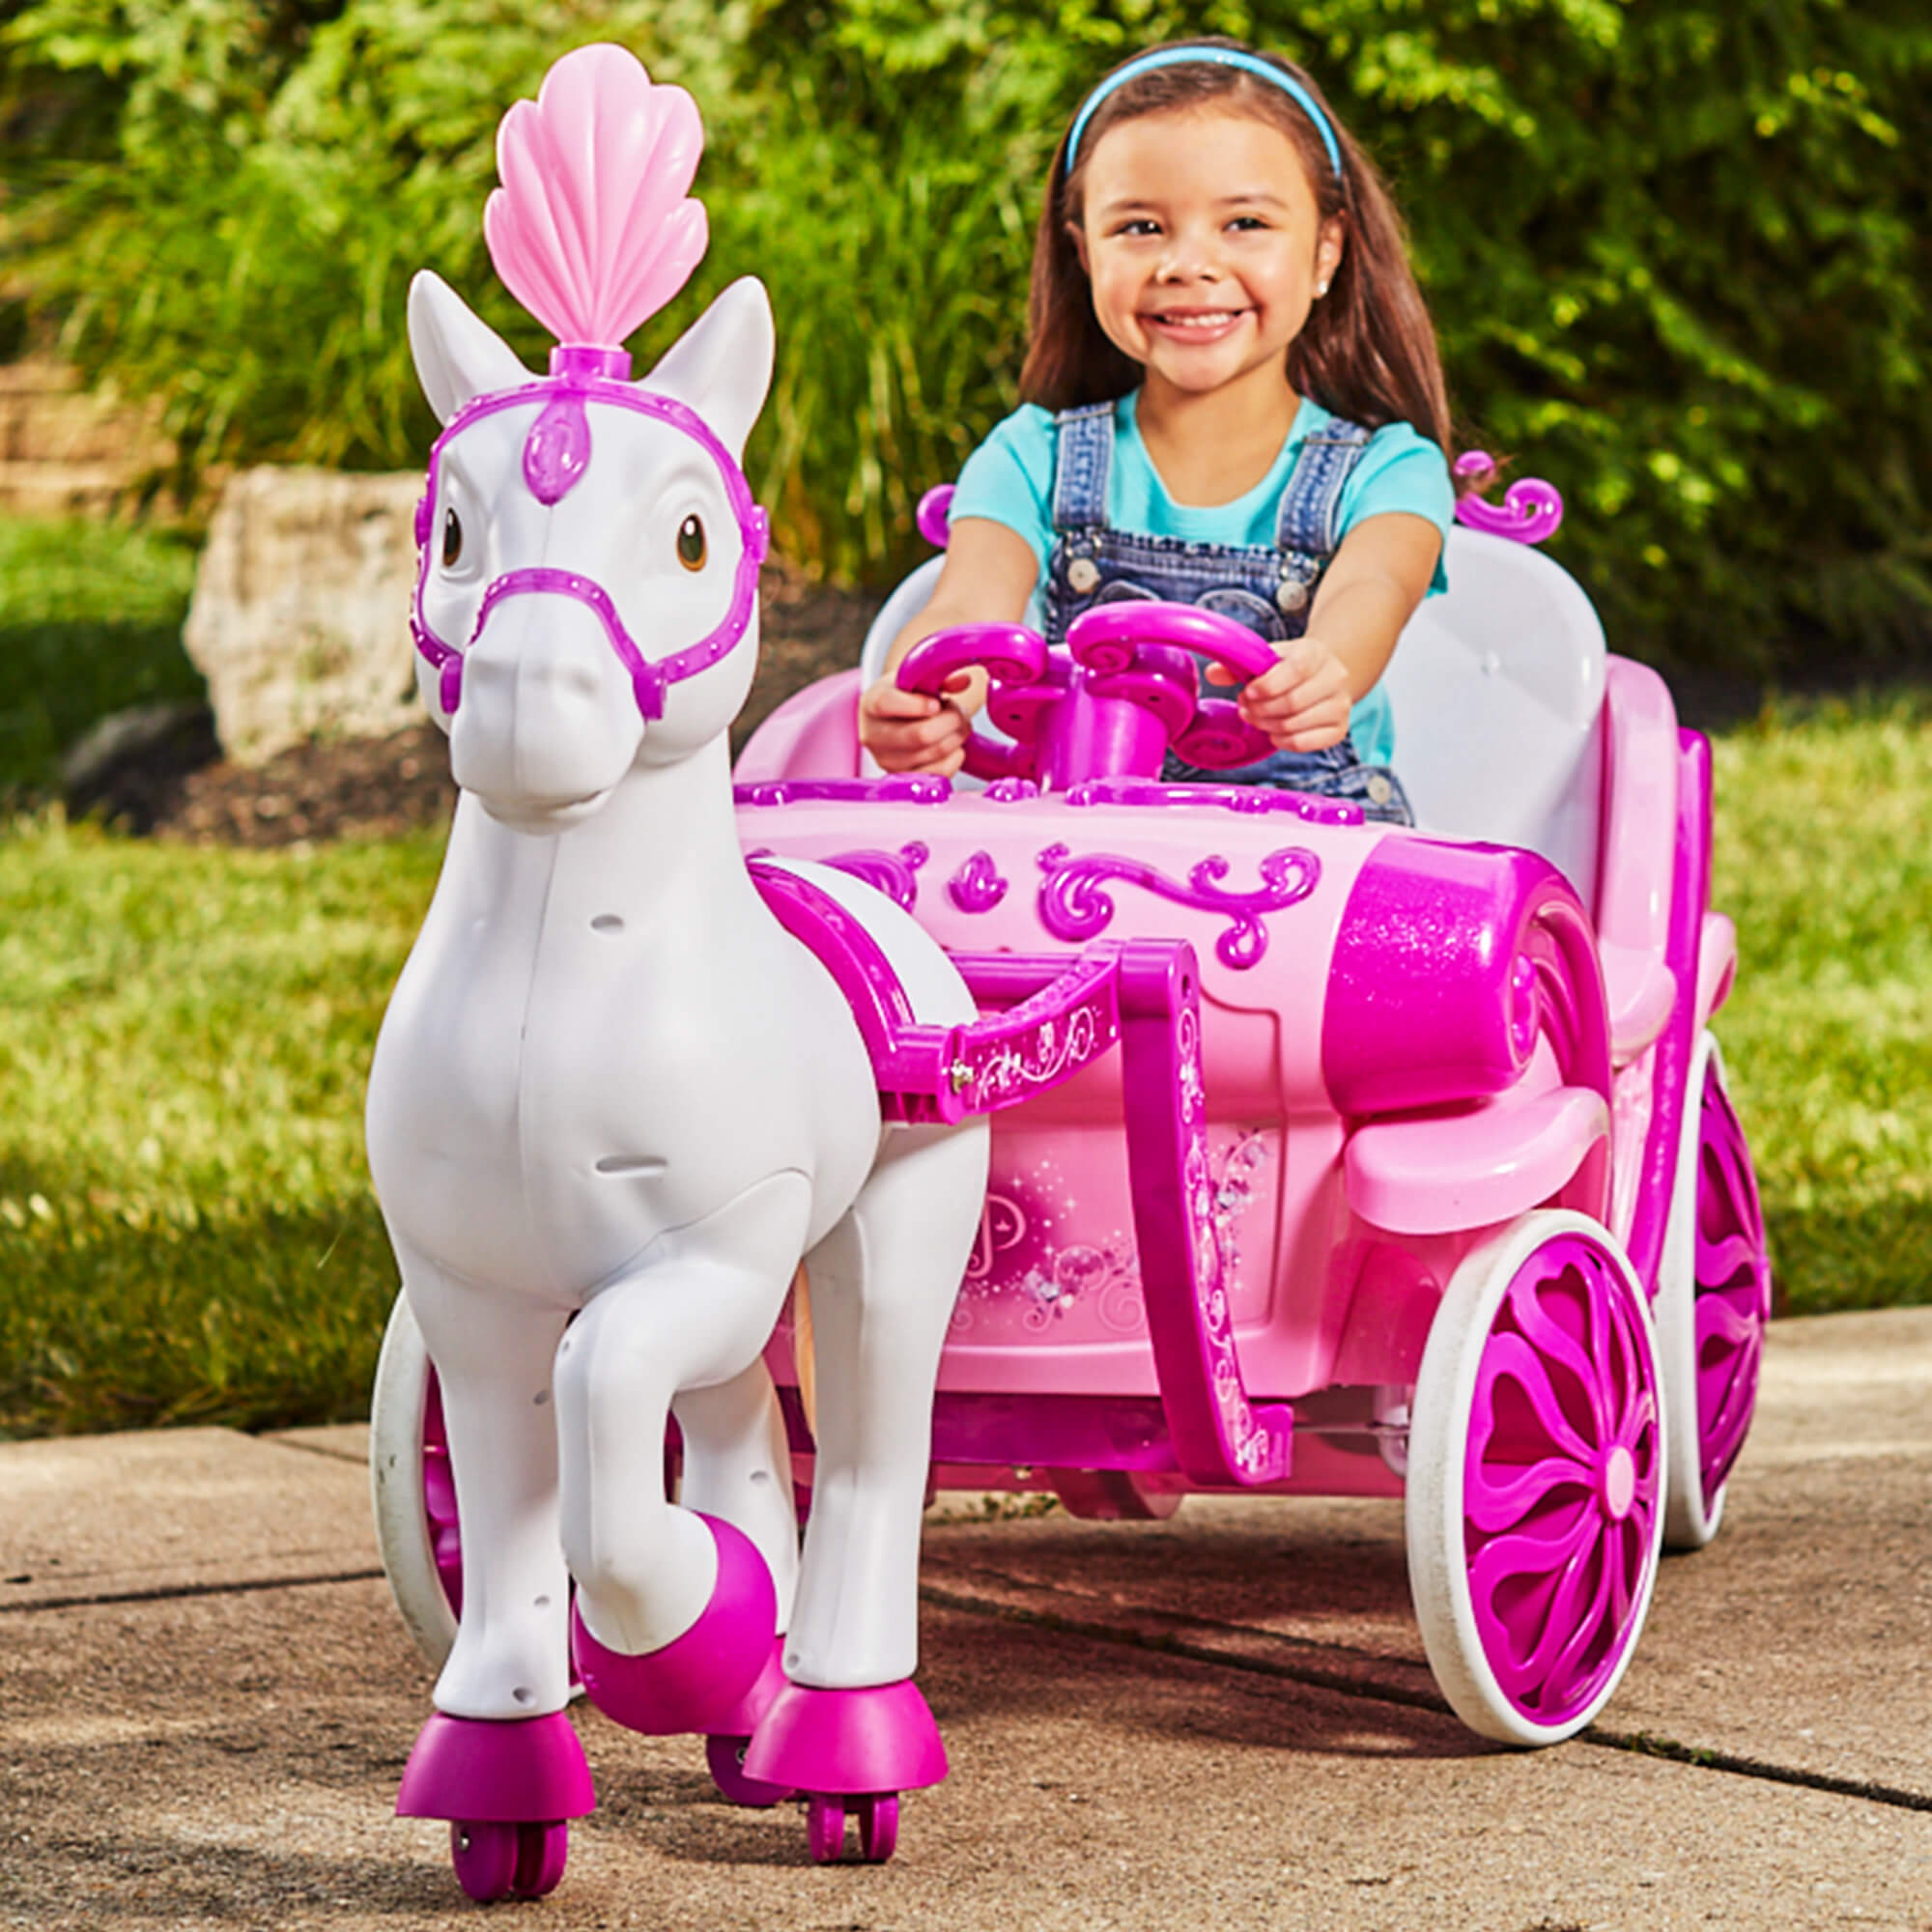 Disney Princess Royal Horse and Carriage Girls 6V Ride-On Toy, Ages 3+ Years by Huffy - image 1 of 13